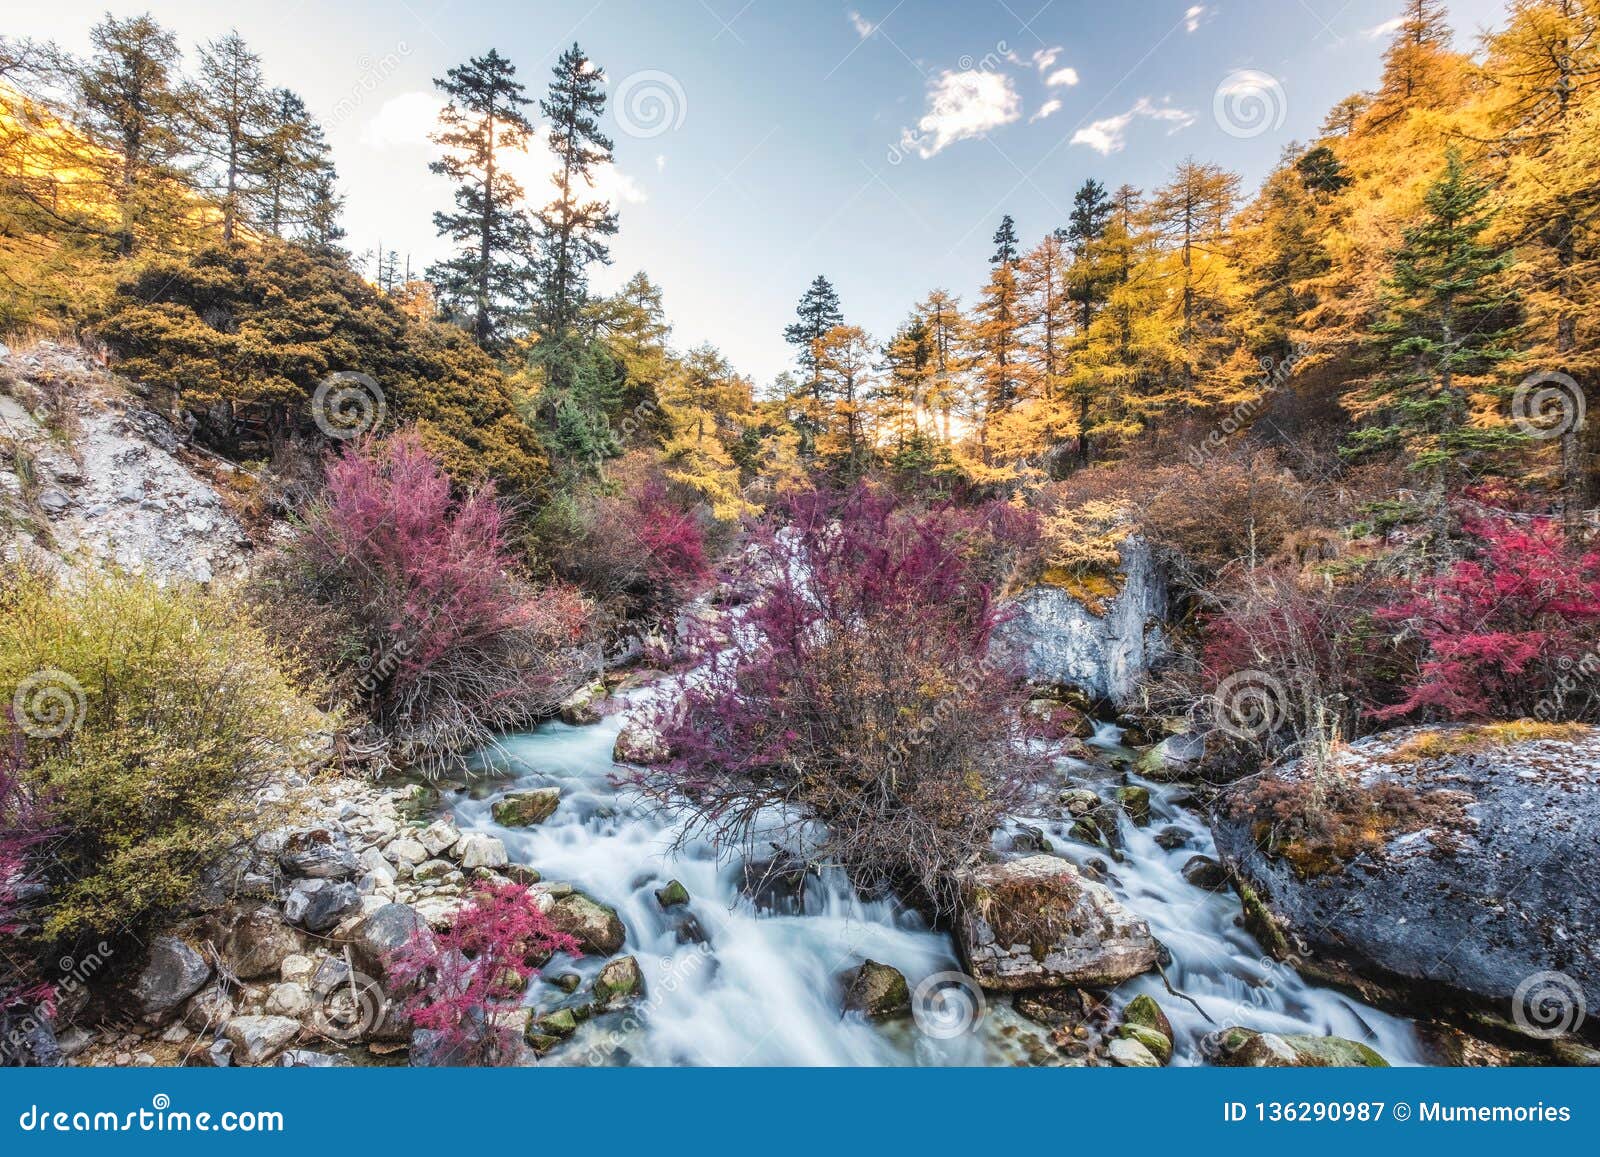 Colorful Waterfall In Autumn Forest Stock Image Image Of Cascade